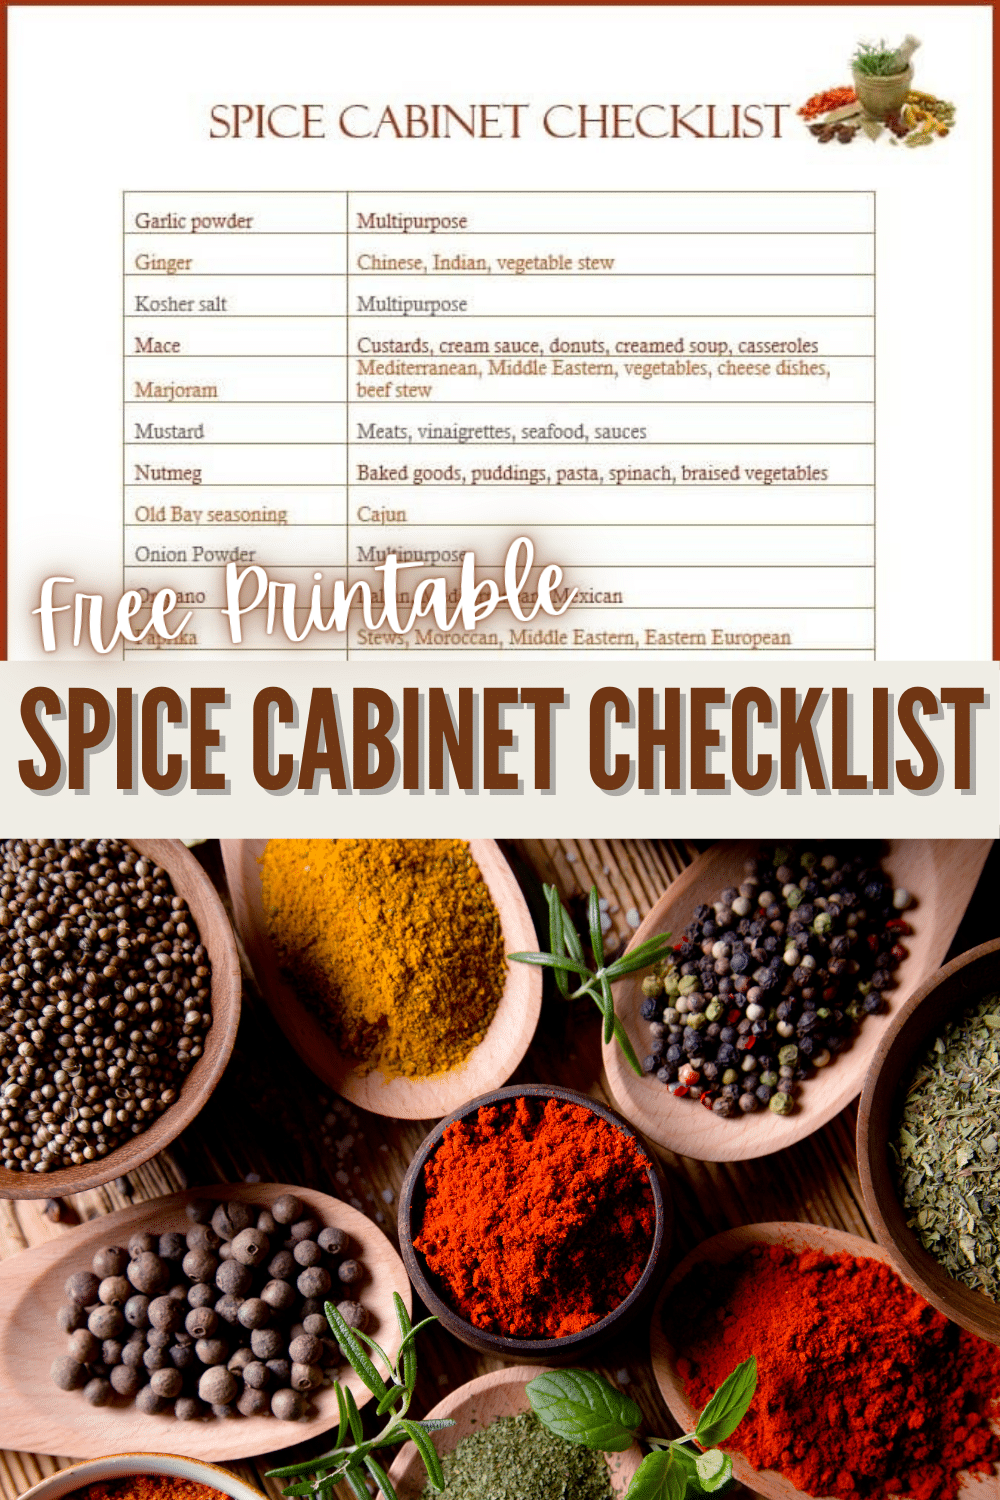 This Spice Cabinet Checklist will help you stock the herbs and spices you need to make most culinary dishes and baked goods. I keep mine taped inside the spice cabinet door so I can tell at a glance if I have all of the spices called for in a new recipe. #spices #checklist #freeprintable via @wondermomwannab